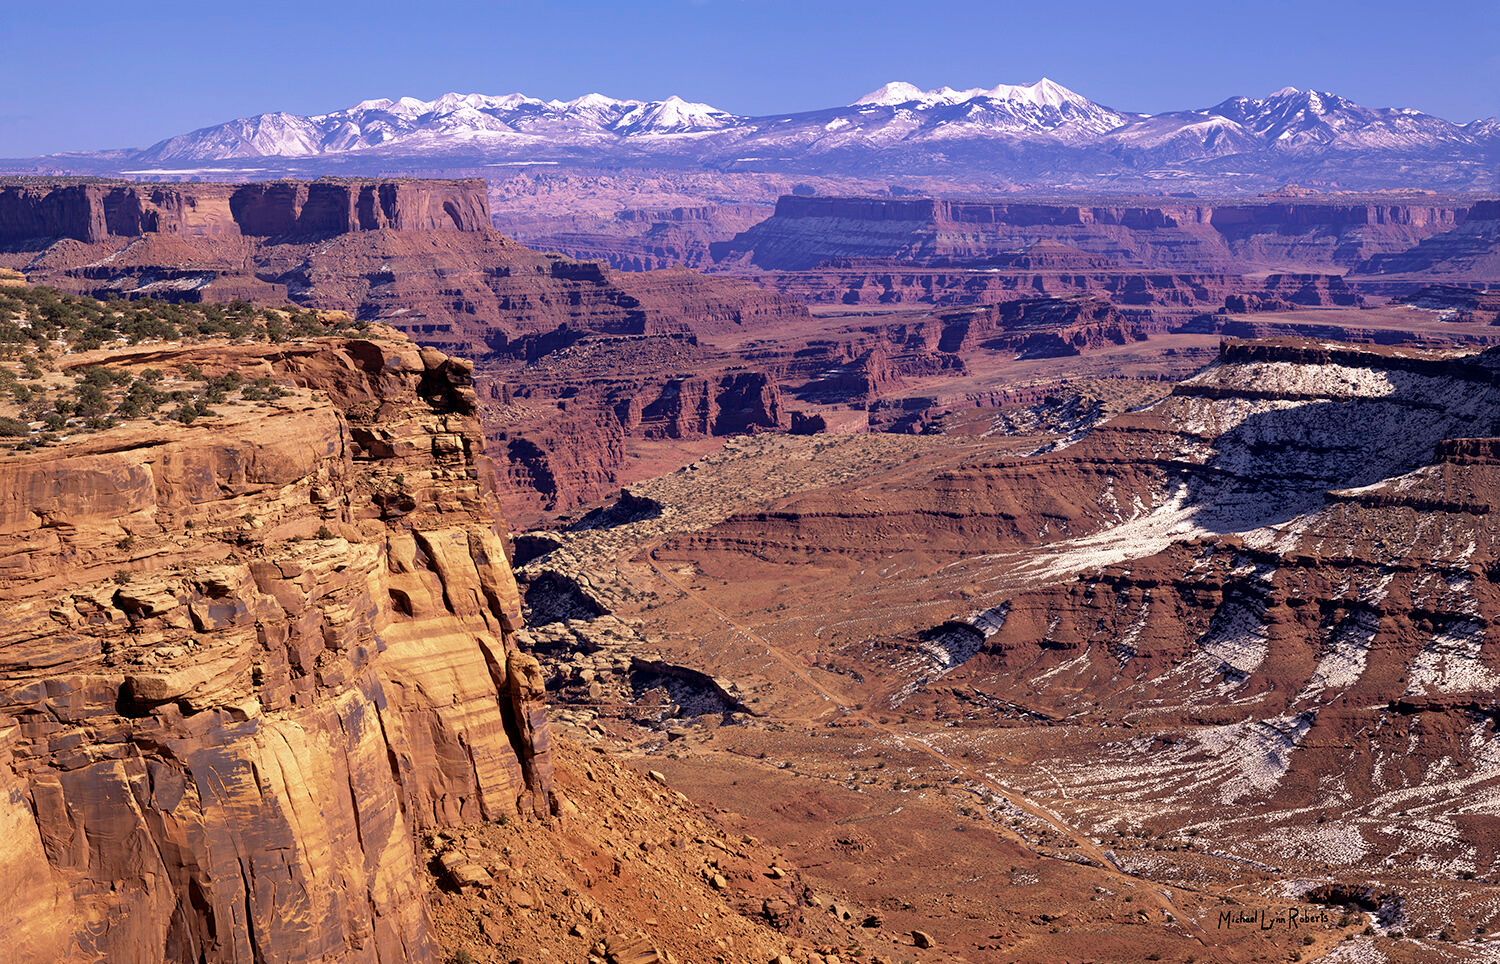 I think Shafer Canyon is one of the most underrated scenic views of the American West. It offers epic views of Canyonlands National...